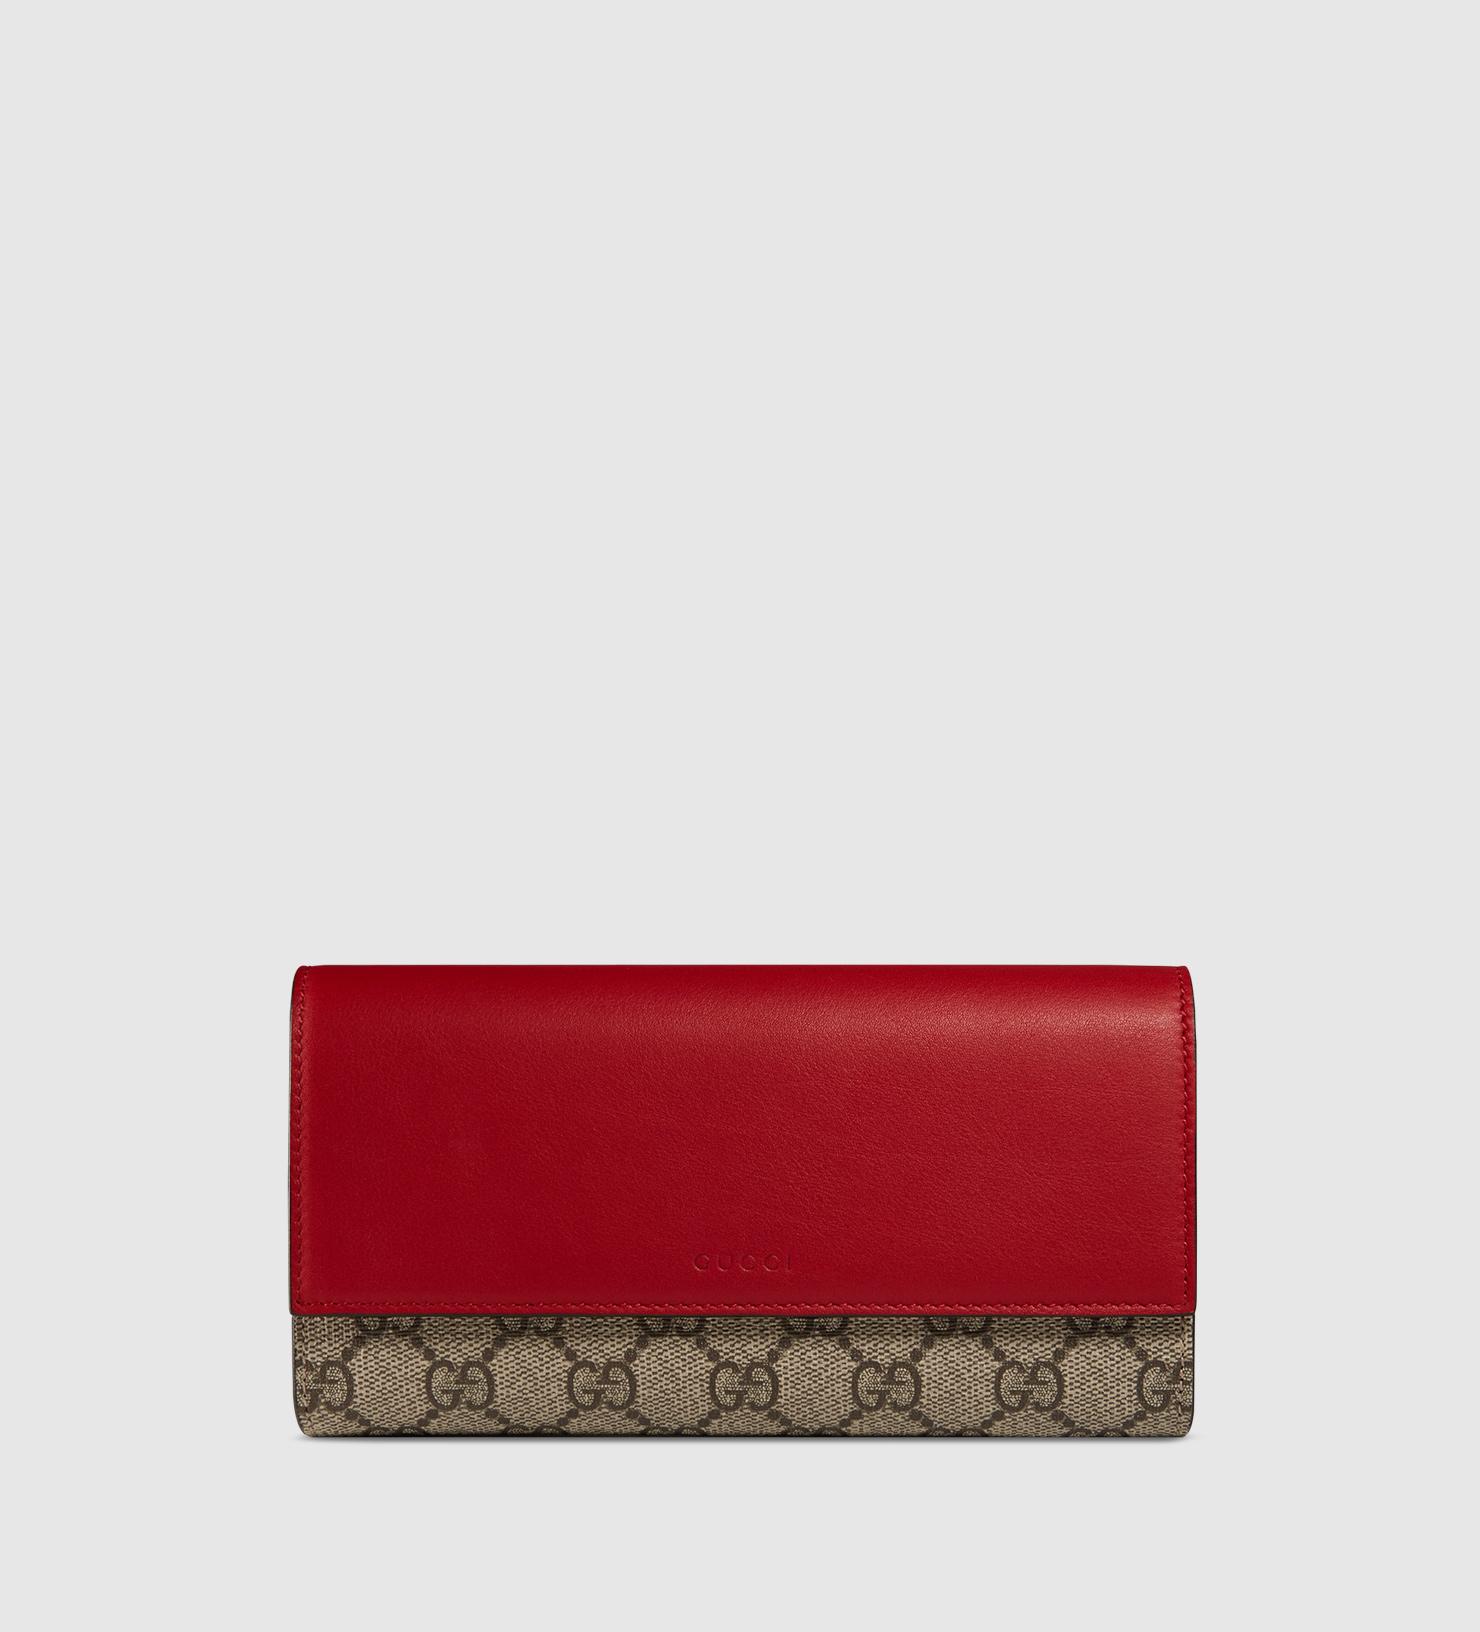 Lyst - Gucci Gg Supreme Wallet in Red